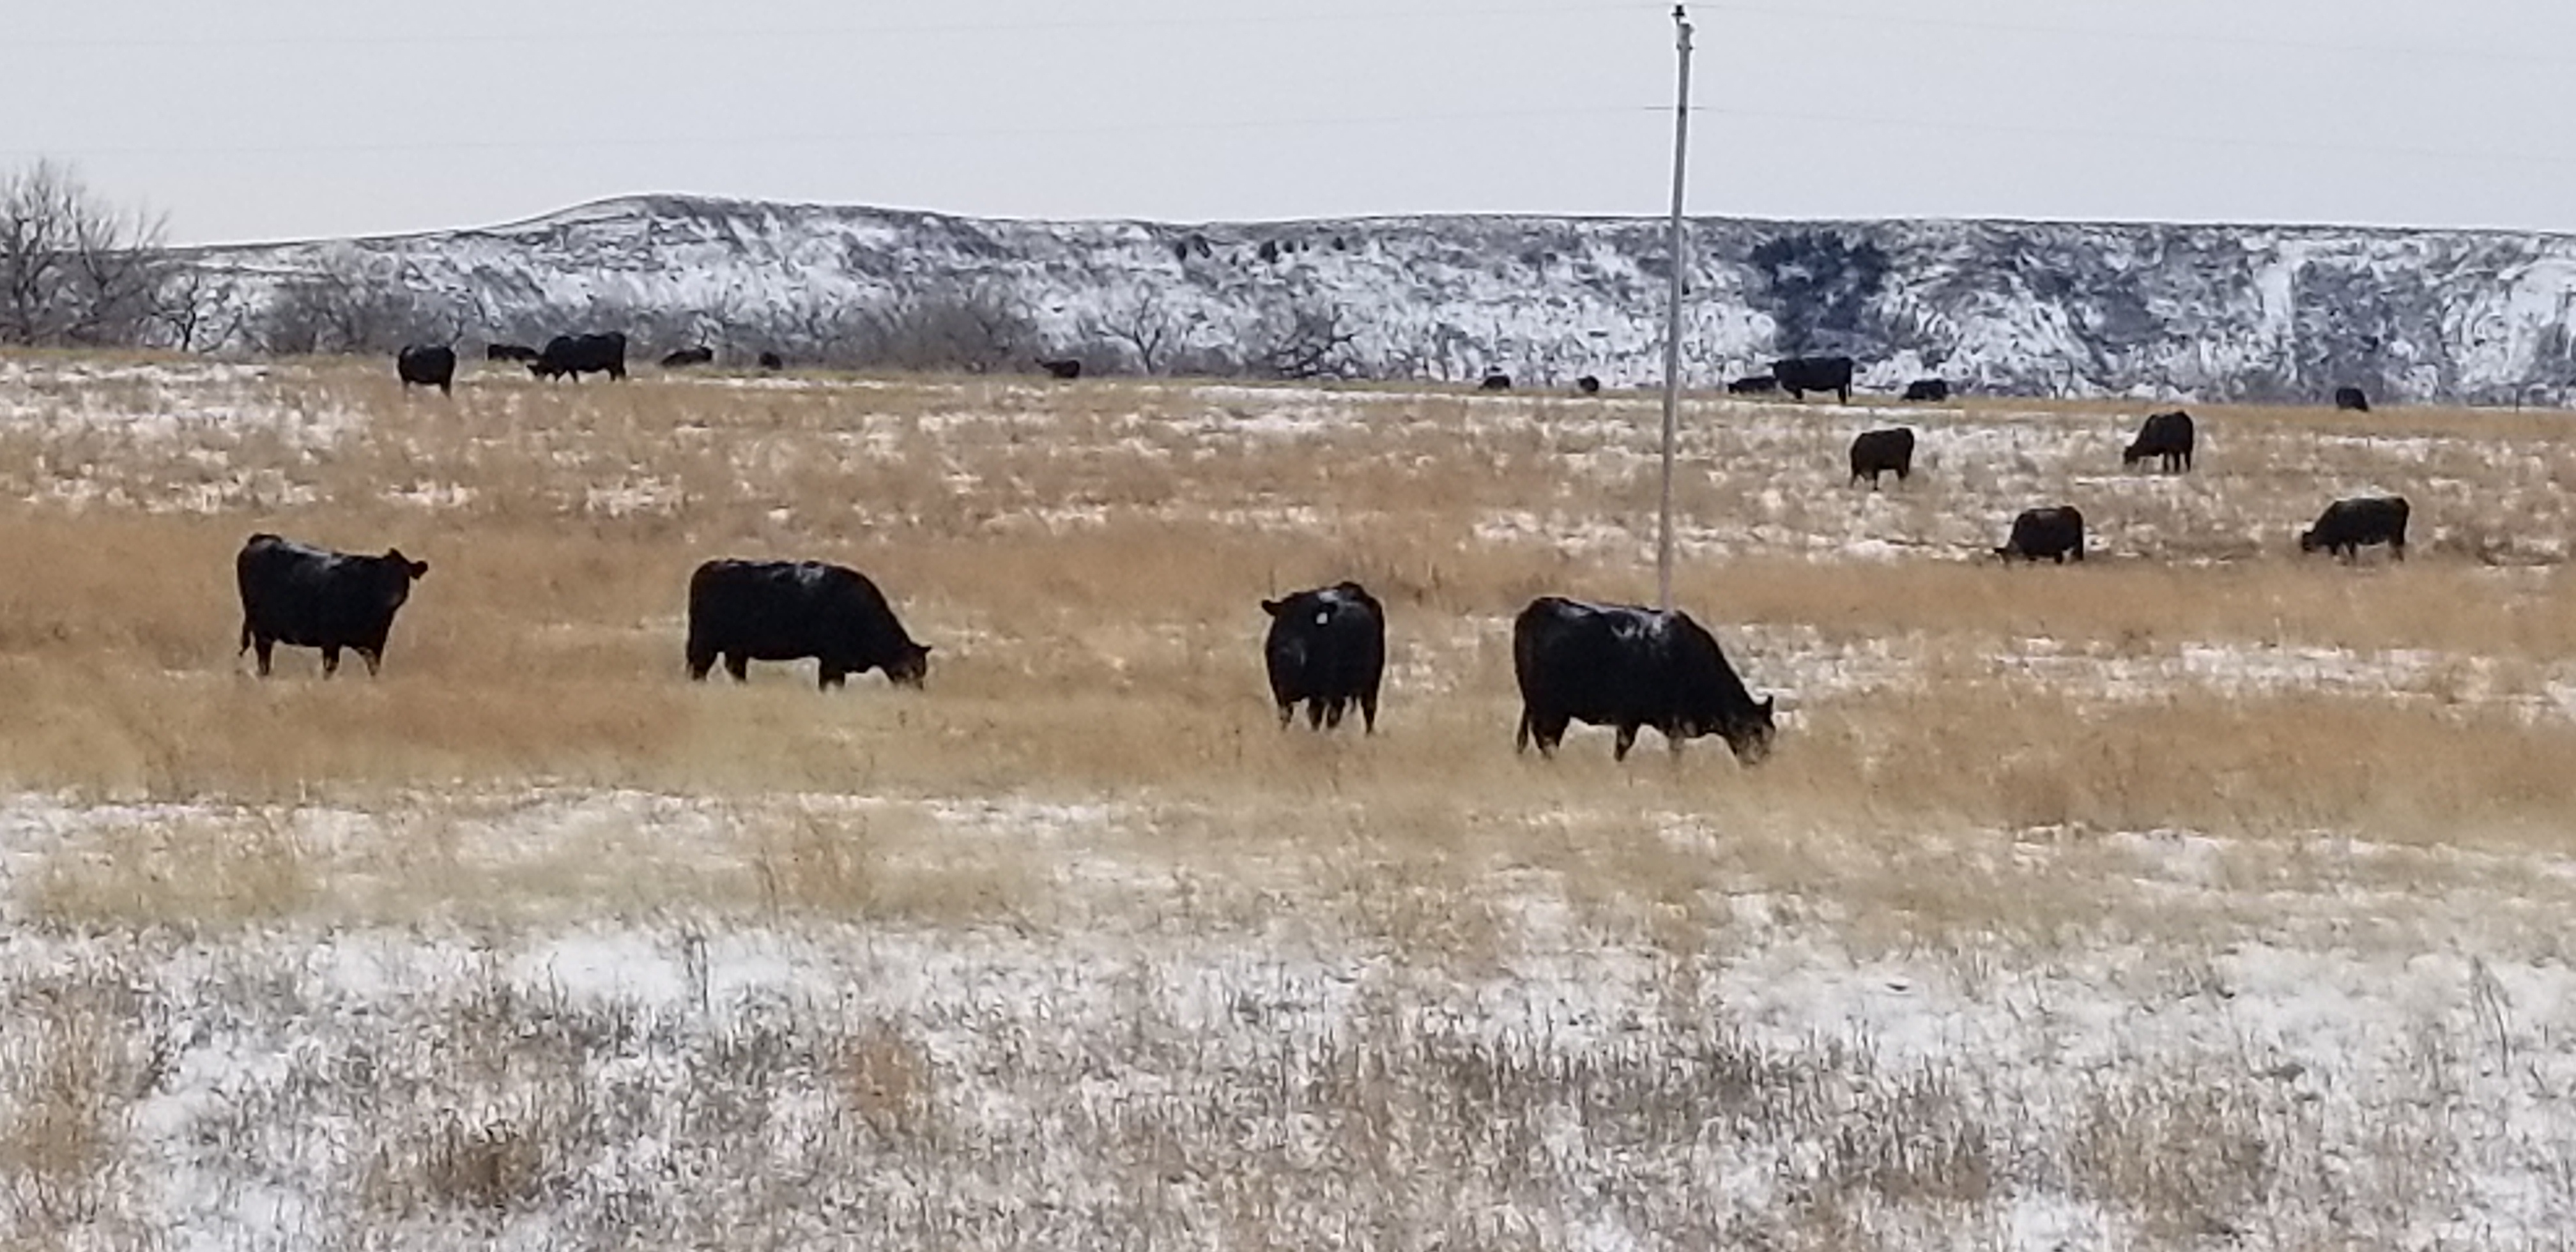 Calving season is a few months away for some producers, so now is a good time to evaluate cow condition and develop winter feeding programs. (NDSU photo)